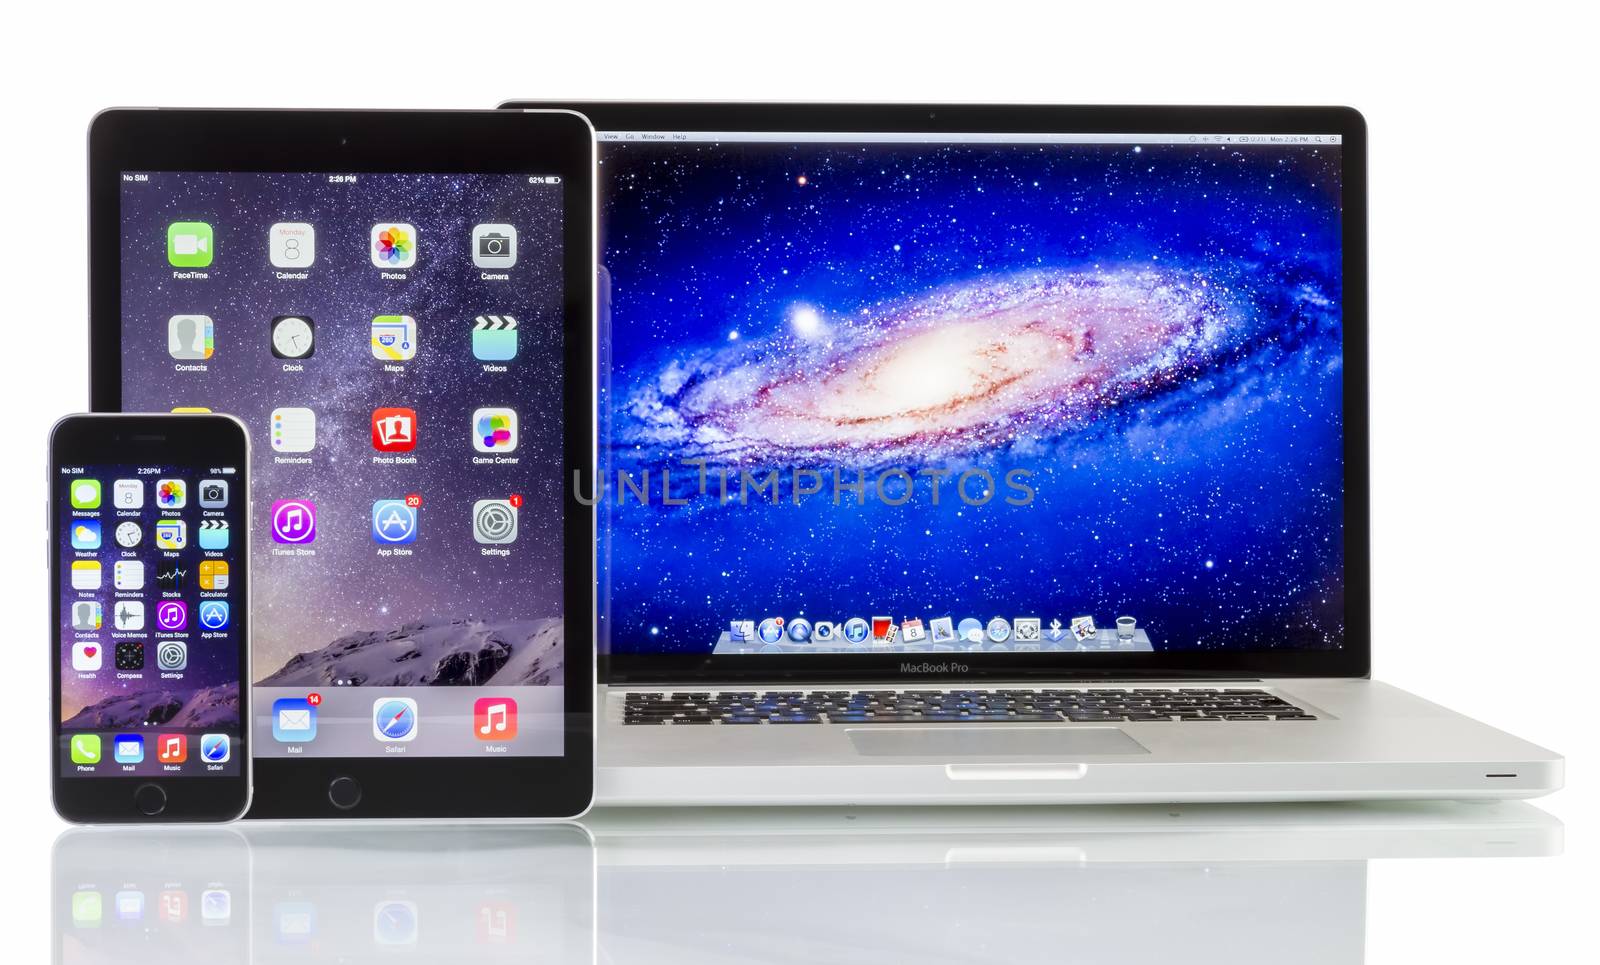 Apple  Macbook Pro, iPad Air 2 and iPhone 6 by manaemedia